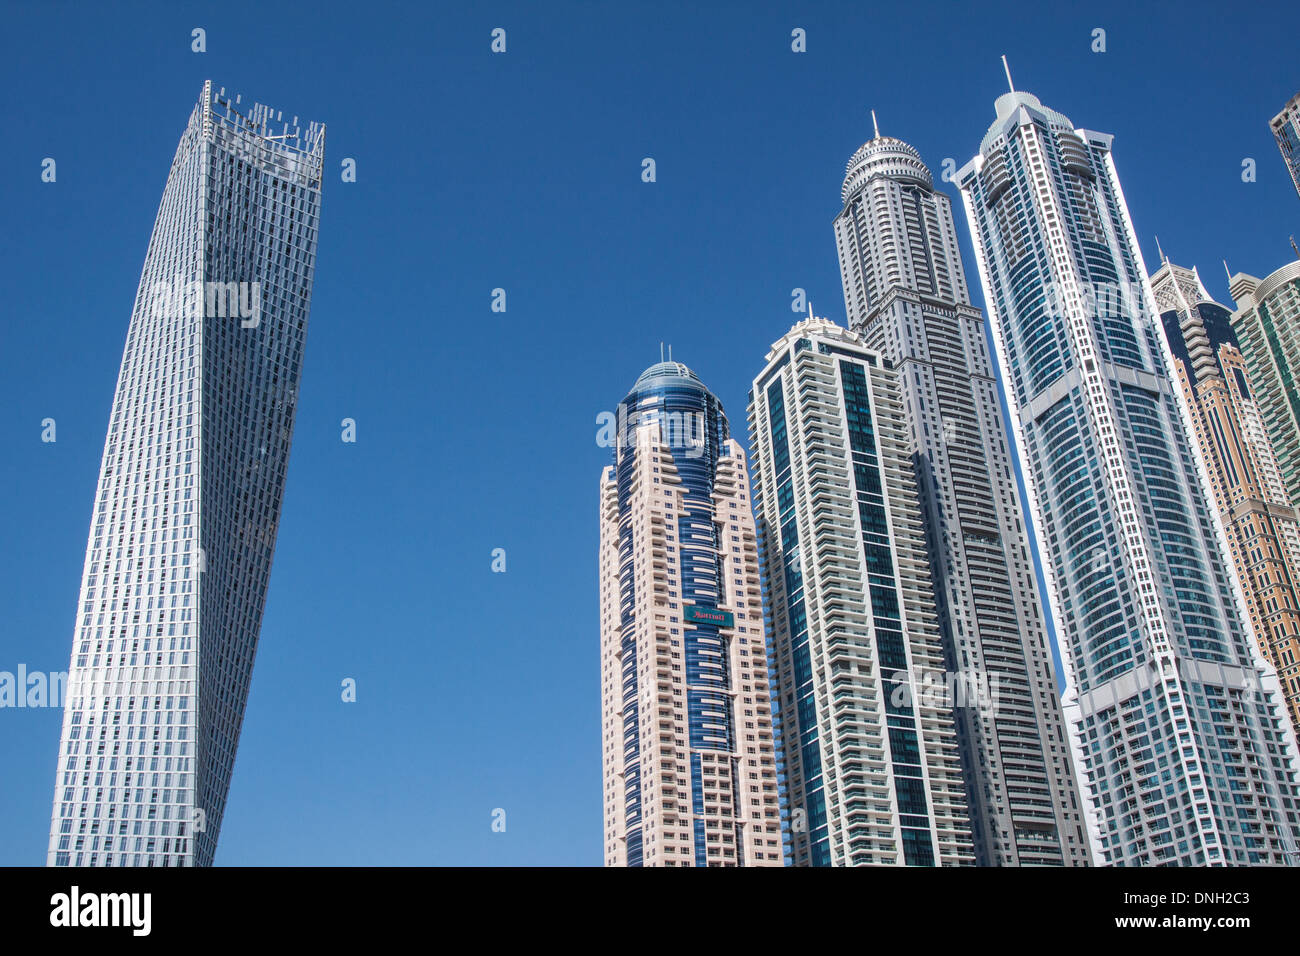 THE CAYAN TOWER, ALSO KNOWN AS THE INFINITY TOWER, AND OTHER BUILDINGS IN THE NEIGHBORHOOD OF THE DUBAI MARINA, DUBAI, UNITED ARAB EMIRATES, MIDDLE EAST Stock Photo